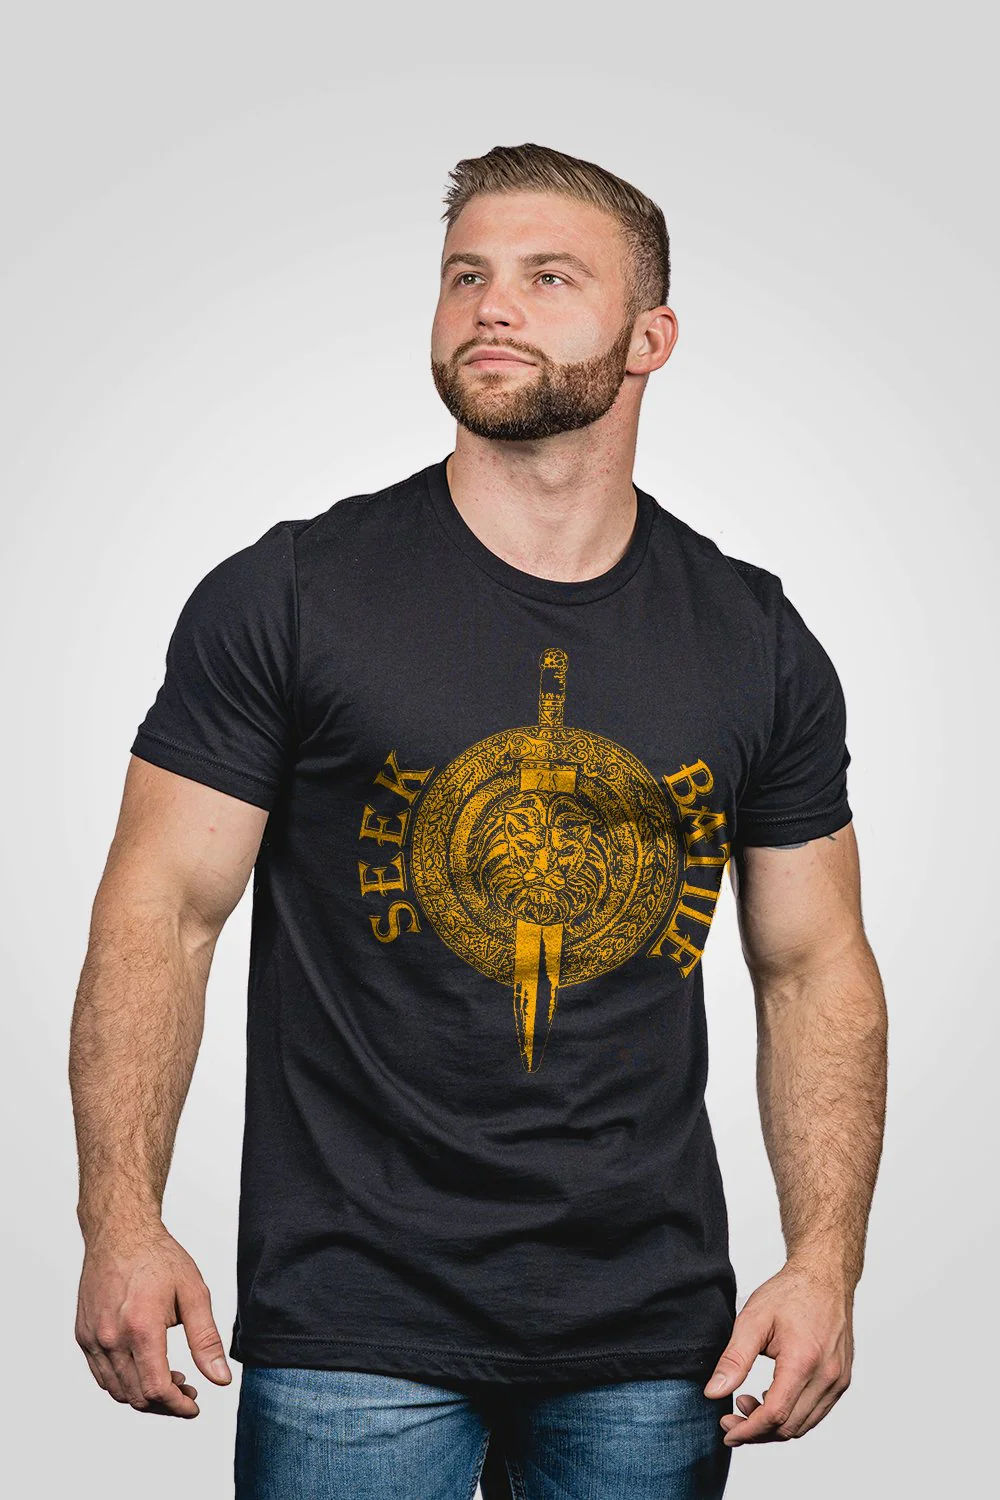 Nine Line Men's T-Shirt - The Man In The Arena posted by ProdOrigin USA in Men's Apparel